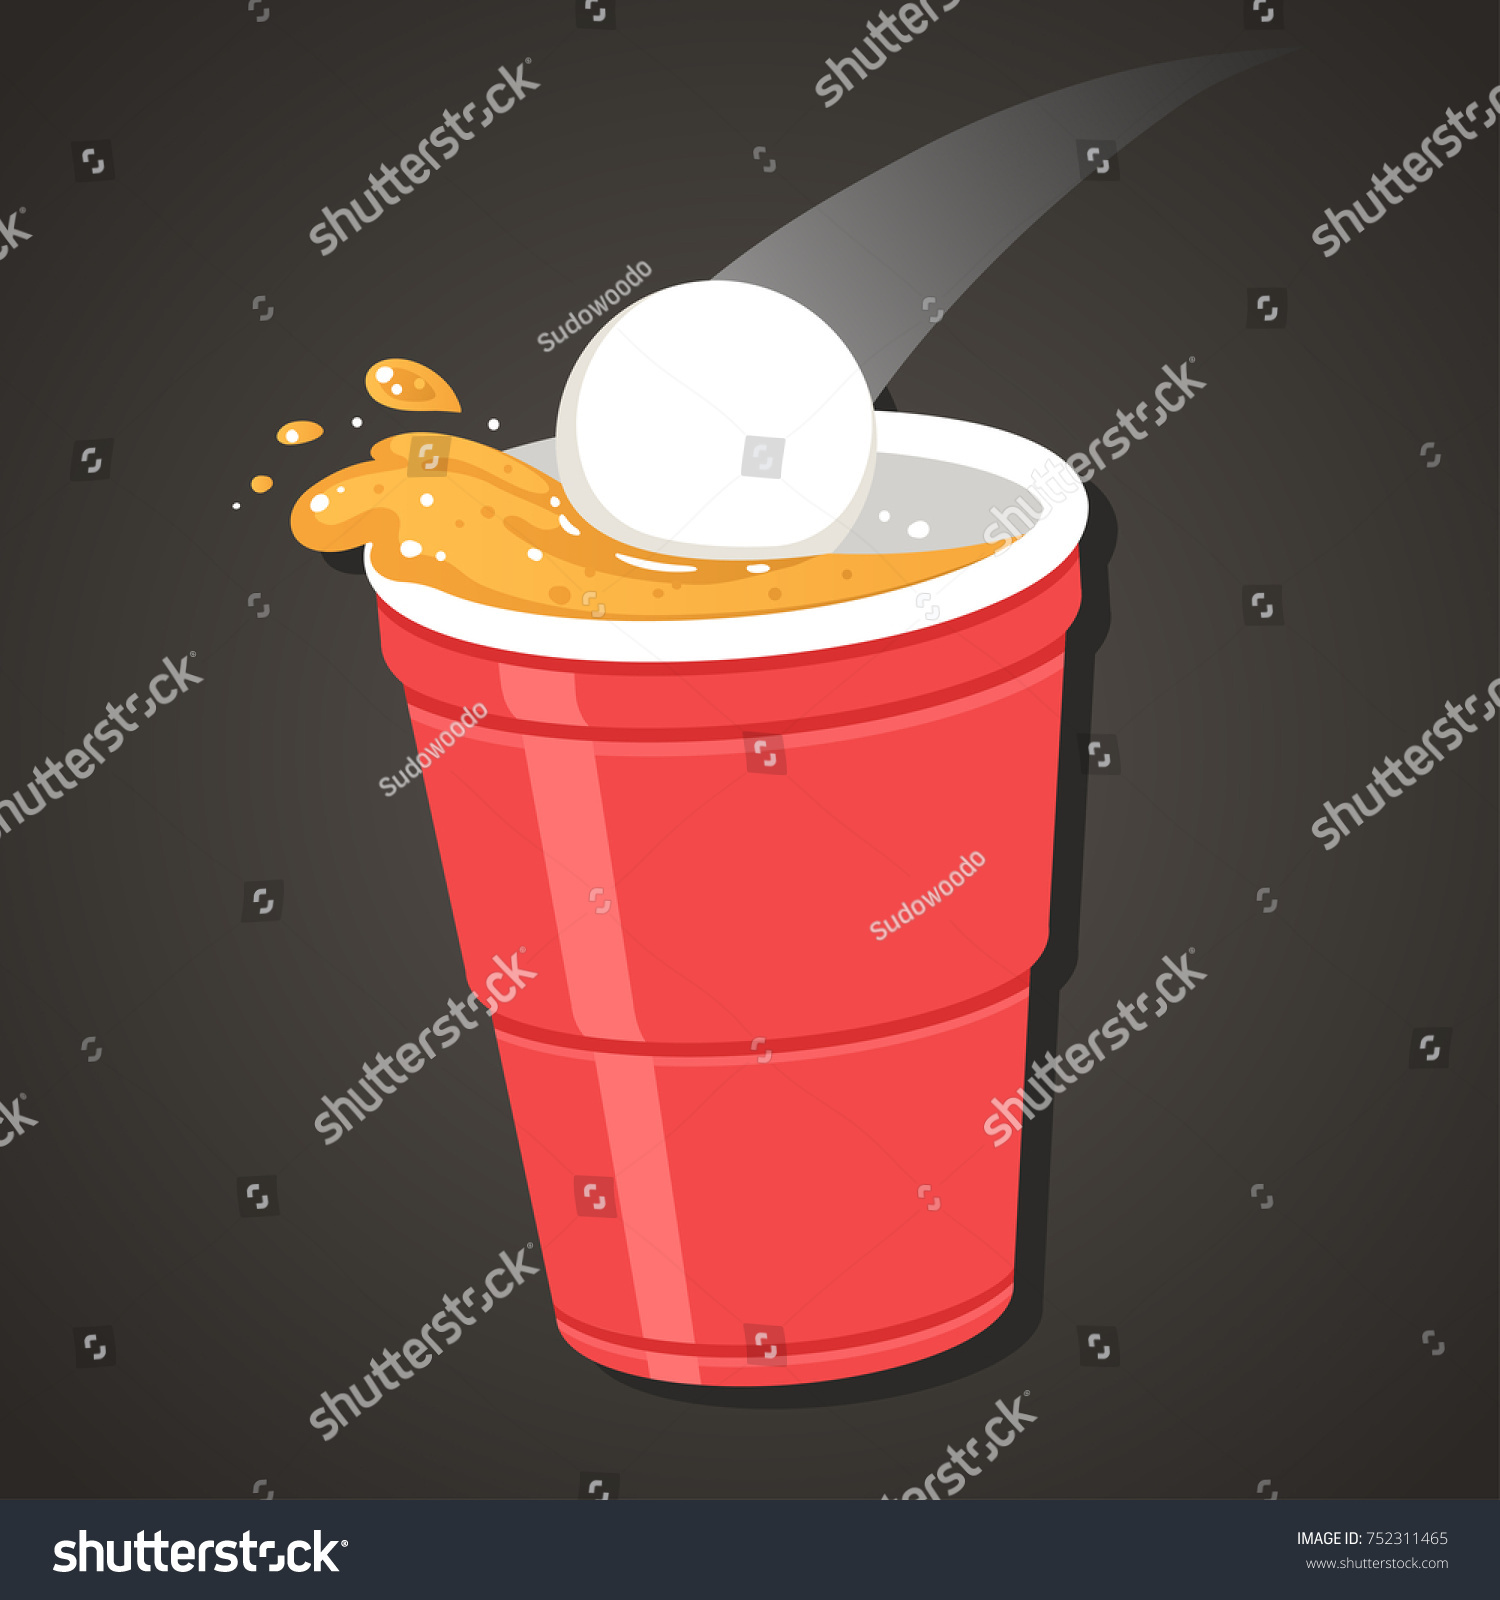 Beer Pong Illustration Ping Pong Ball Stock Image Download Now